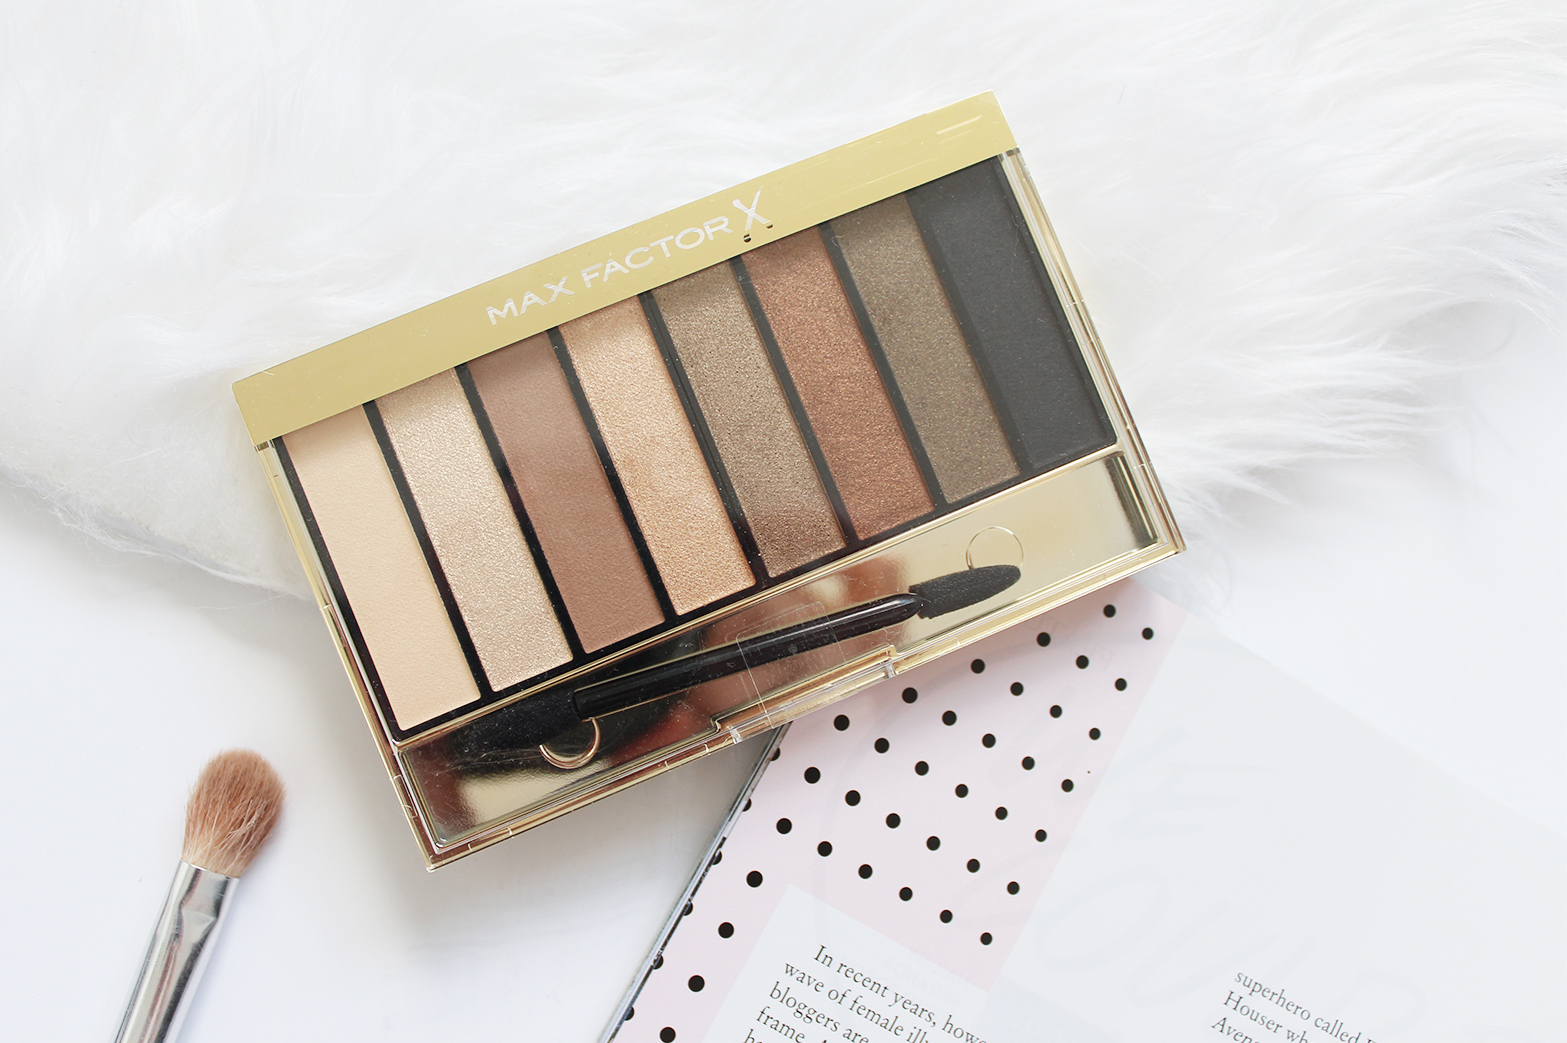 MAX FACTOR | Masterpiece Nude Palette Contouring Eye Shadows in 02 Golden Nudes - Review + Swatches - CassandraMyee